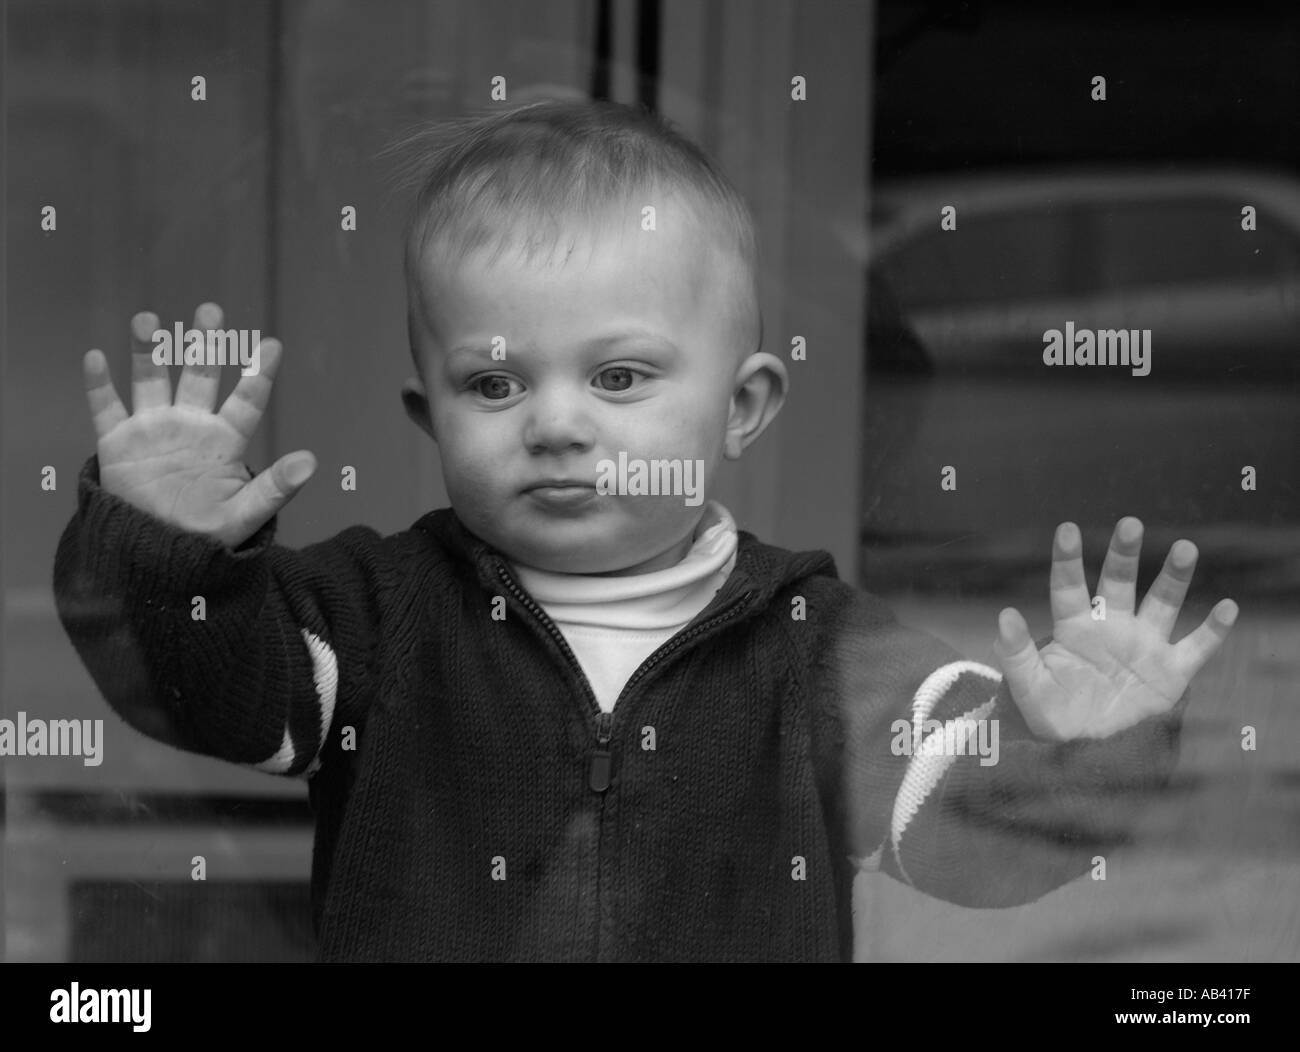 Small boy looking out glass doorway Stock Photo